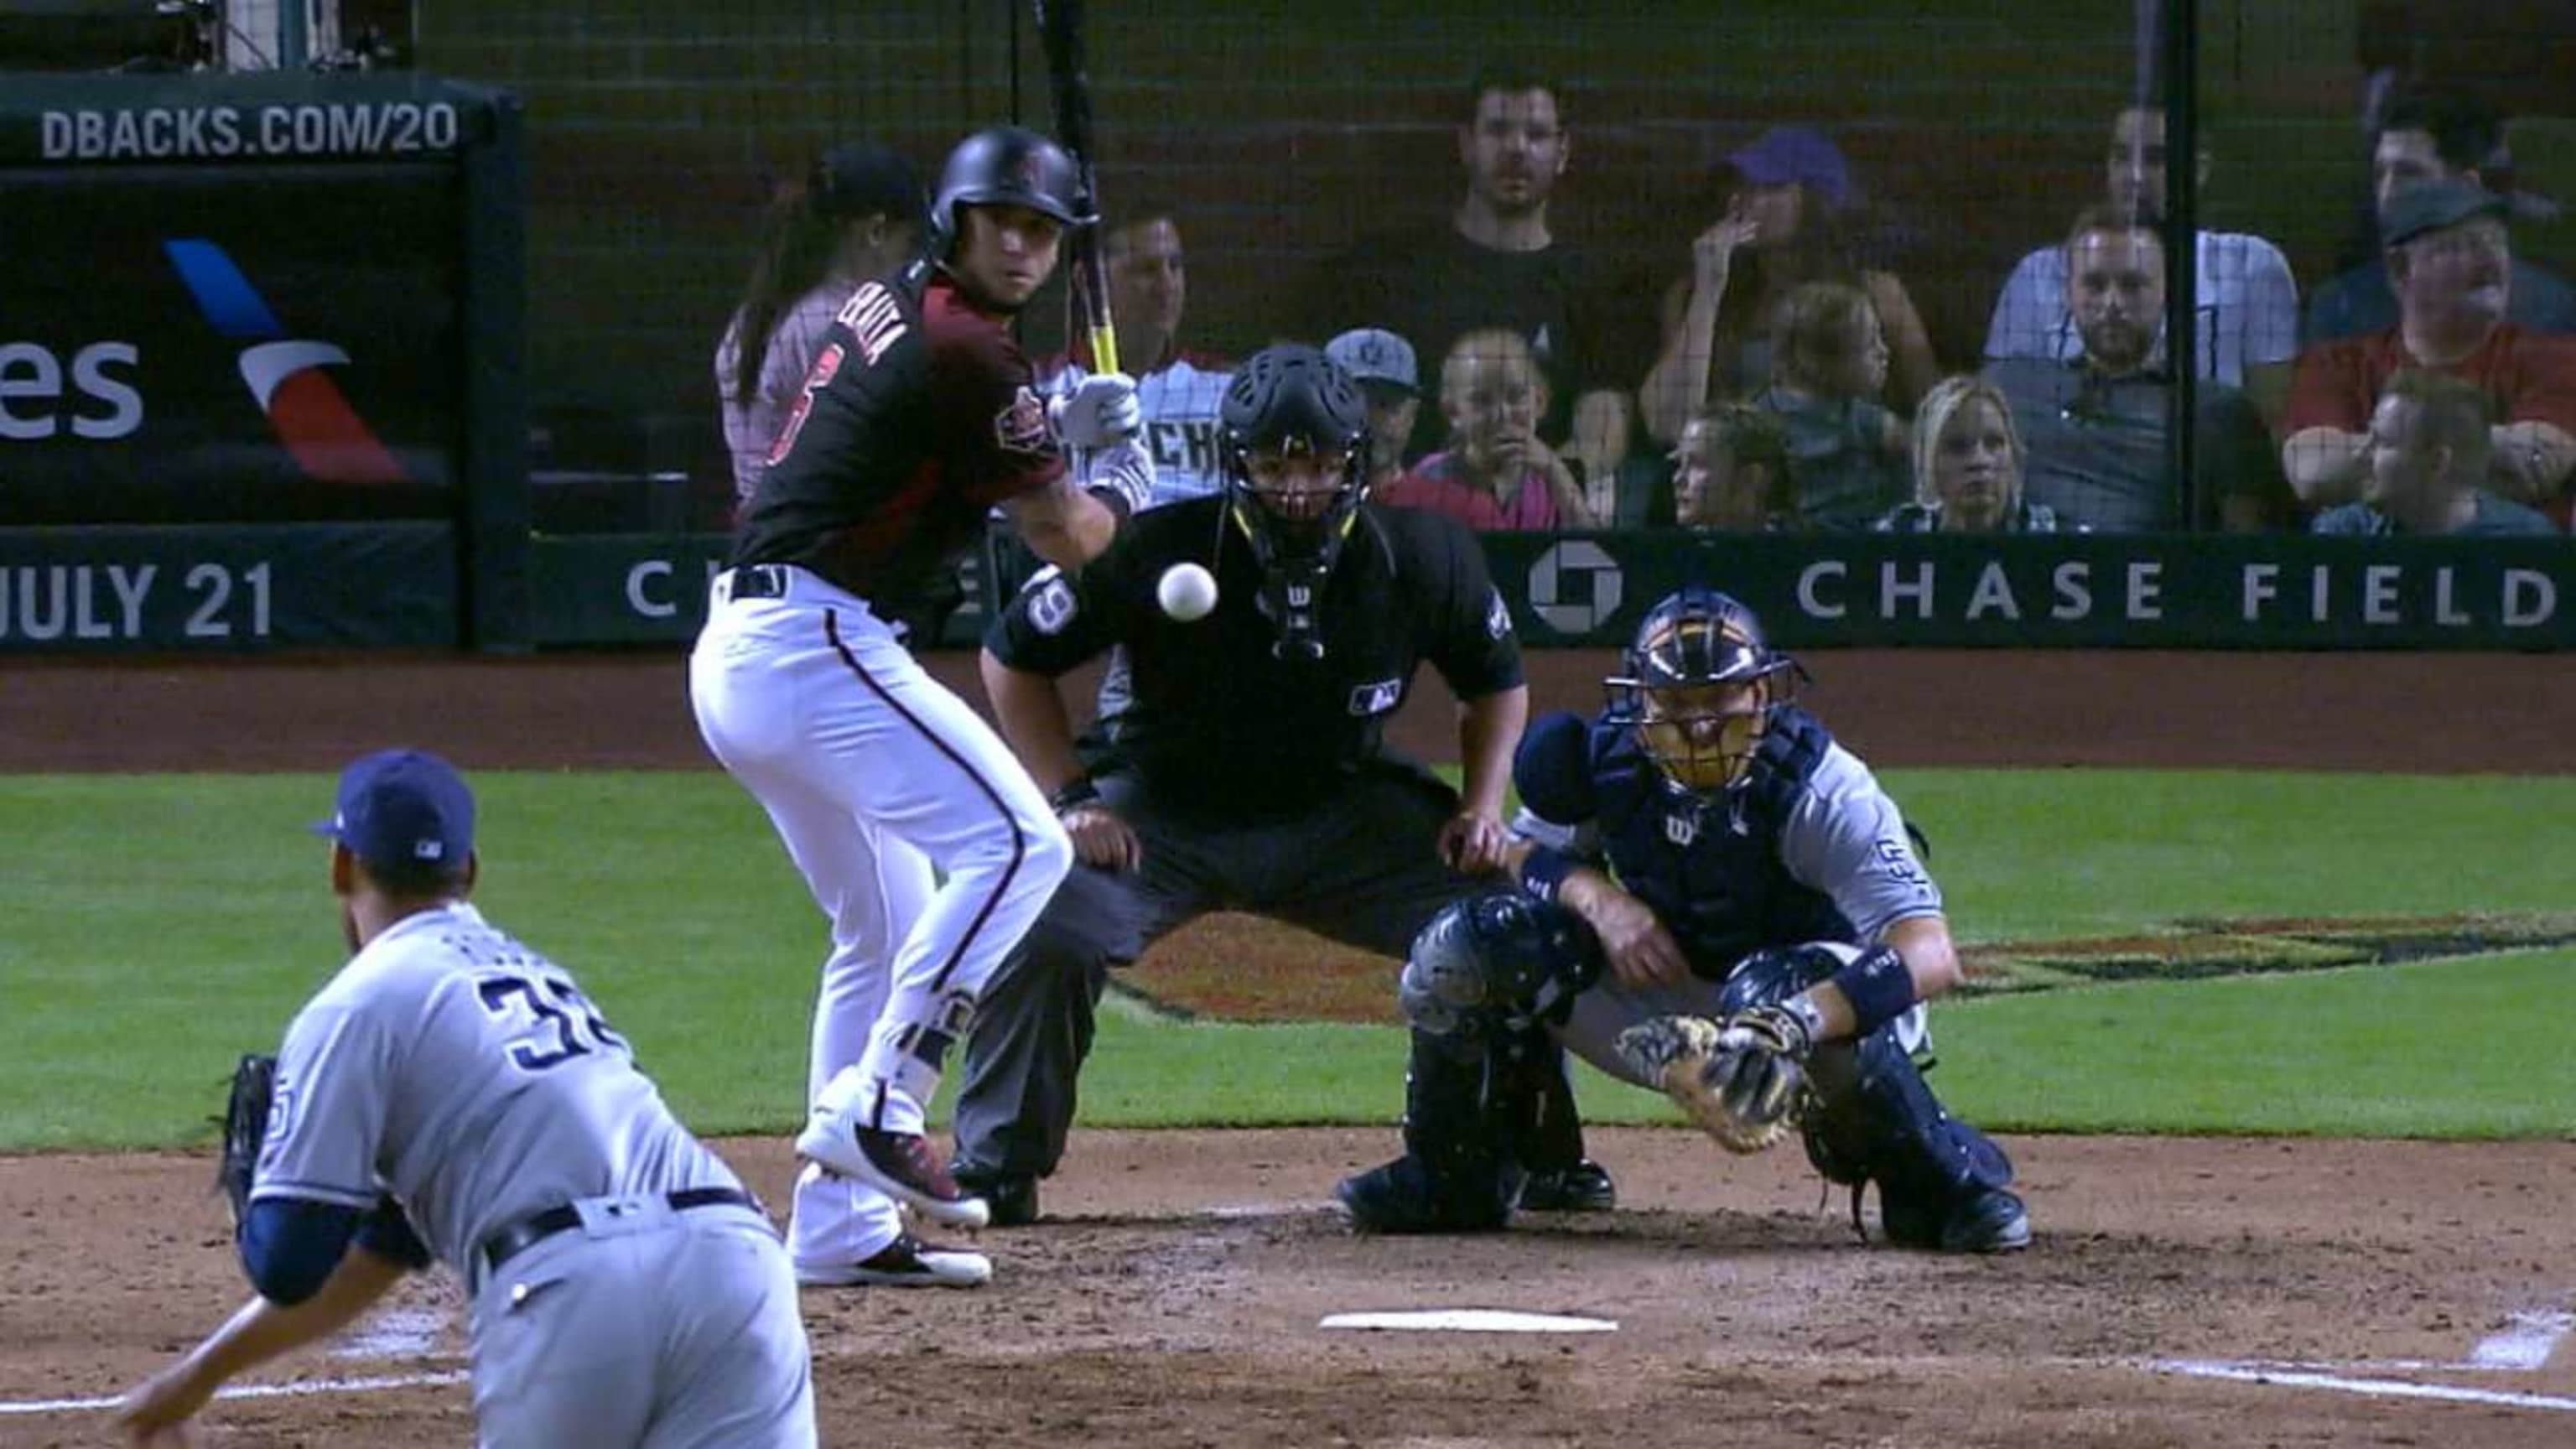 D-backs bring power bats on road trip, hit 5 home runs in win over Pirates